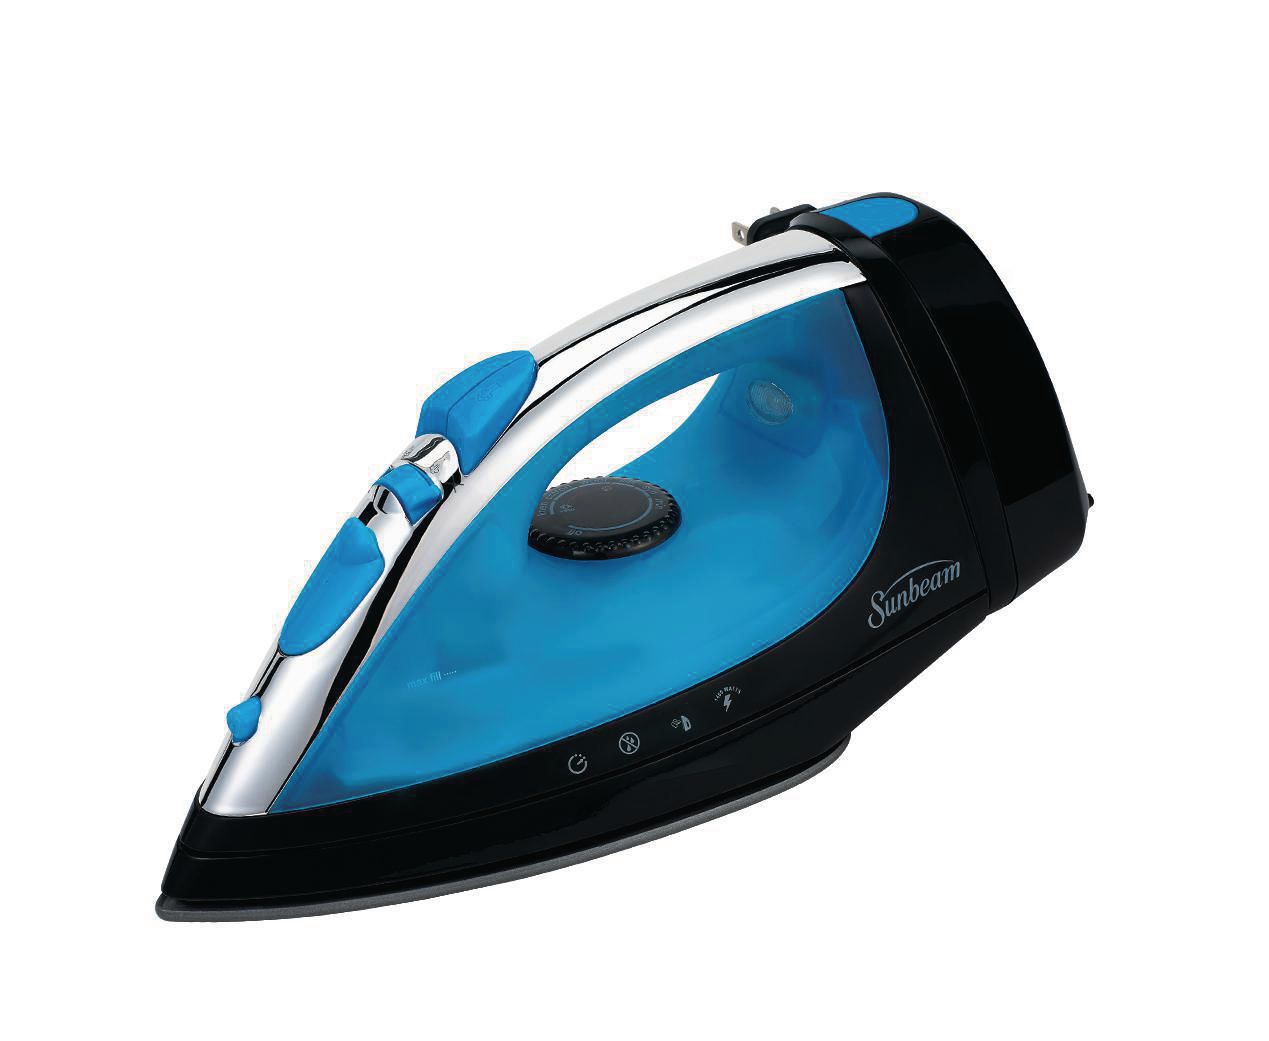 Black//Blue GCSBCL-202-000 Sunbeam Steam Master 1400 Watt Mid-size Anti-Drip Non-Stick Soleplate Iron with Variable Steam control and 8 Retractable Cord